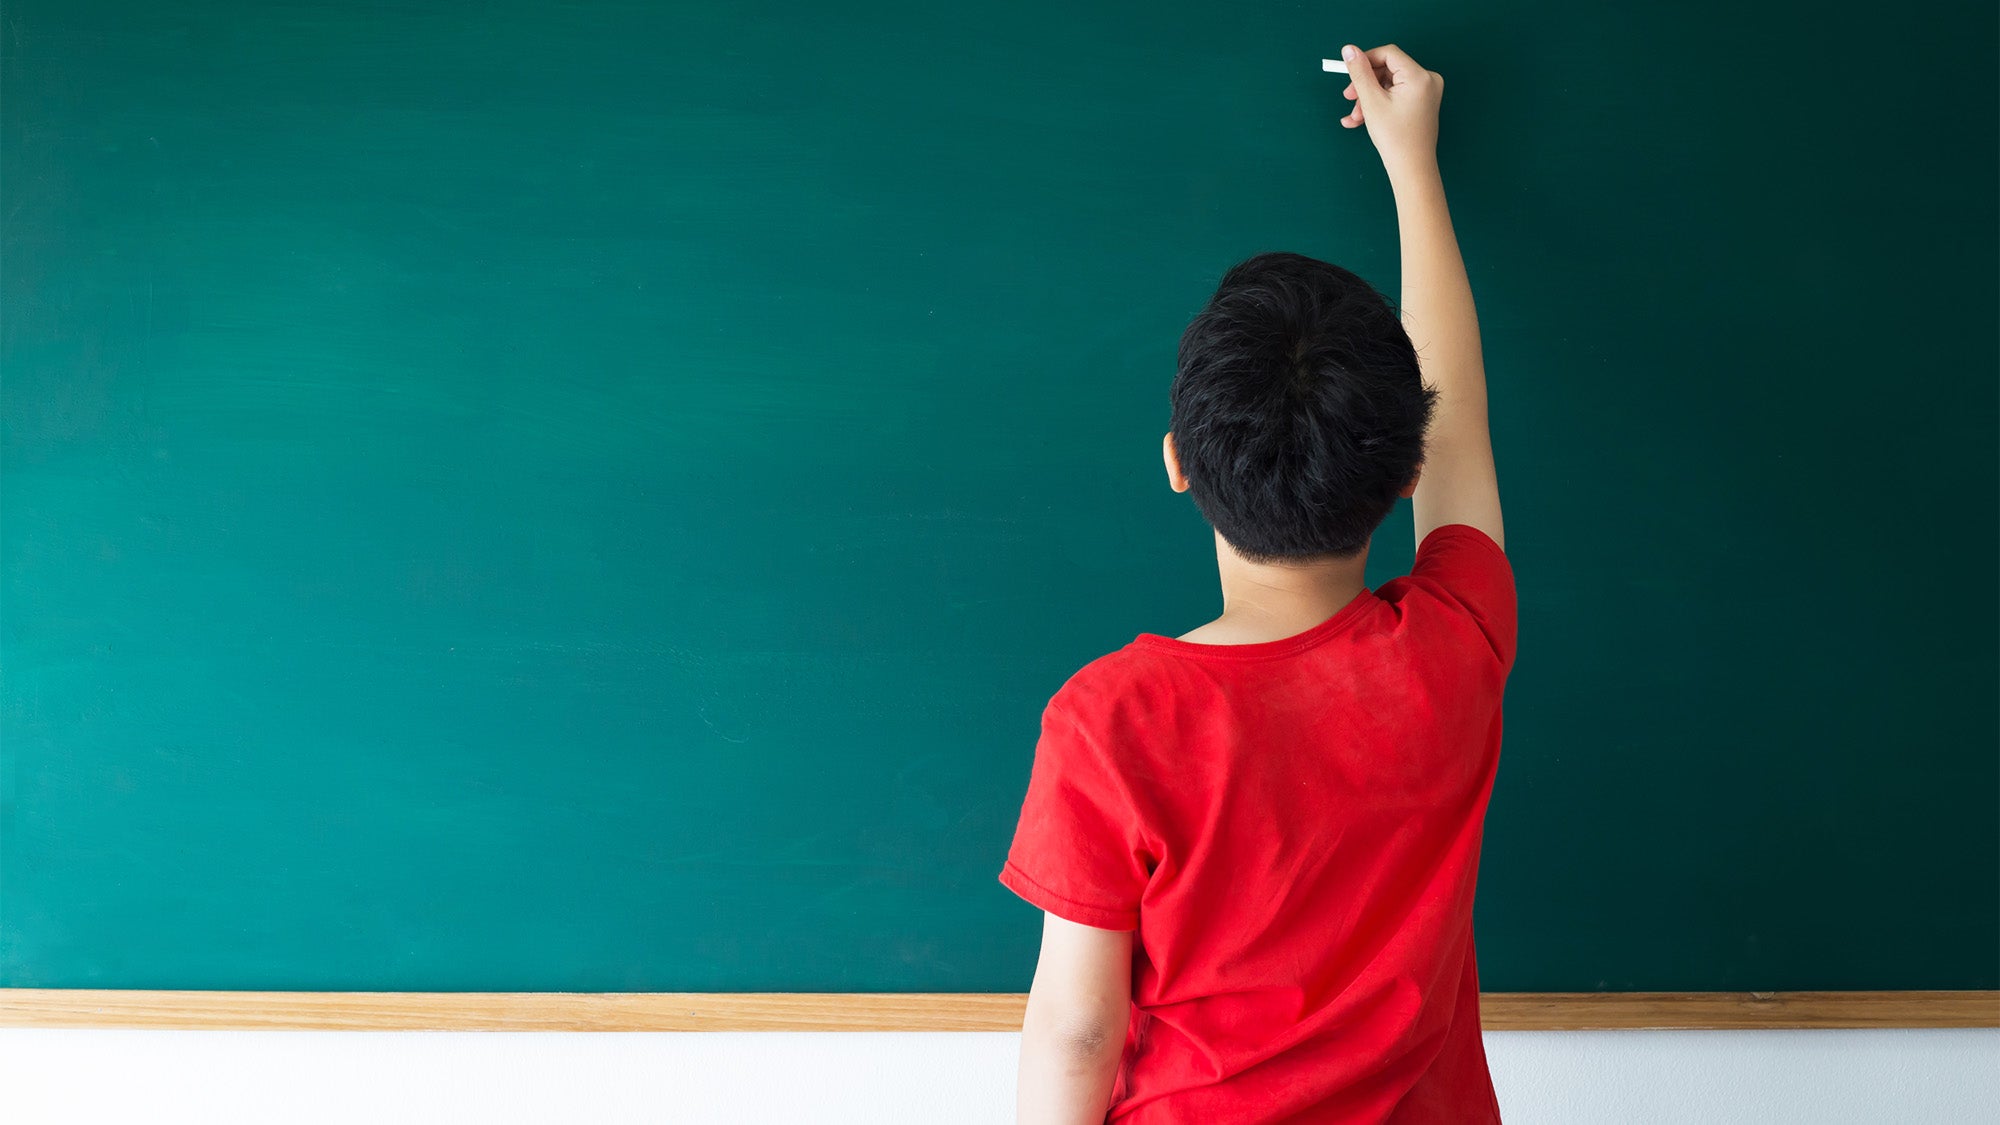 A boy stands at a blank chalkboard holding a piece of chalk